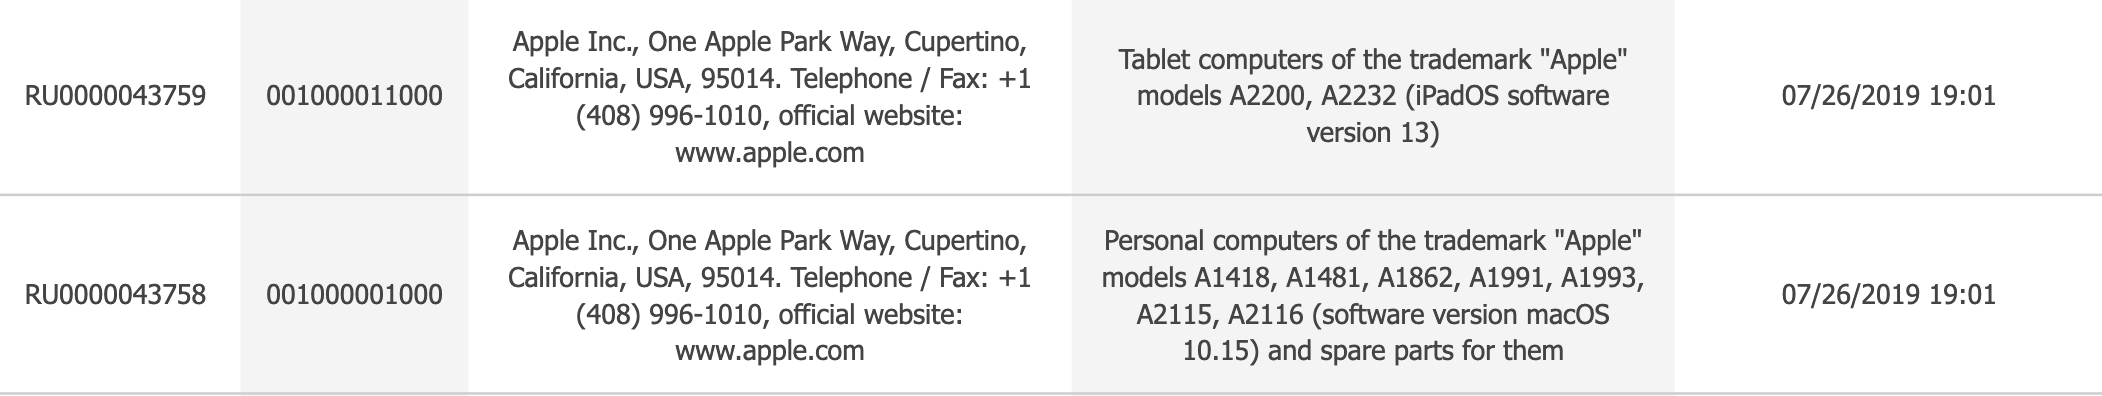 Apple OFFICIALLY CONFIRMS two NEW Products for LAUNCH registration